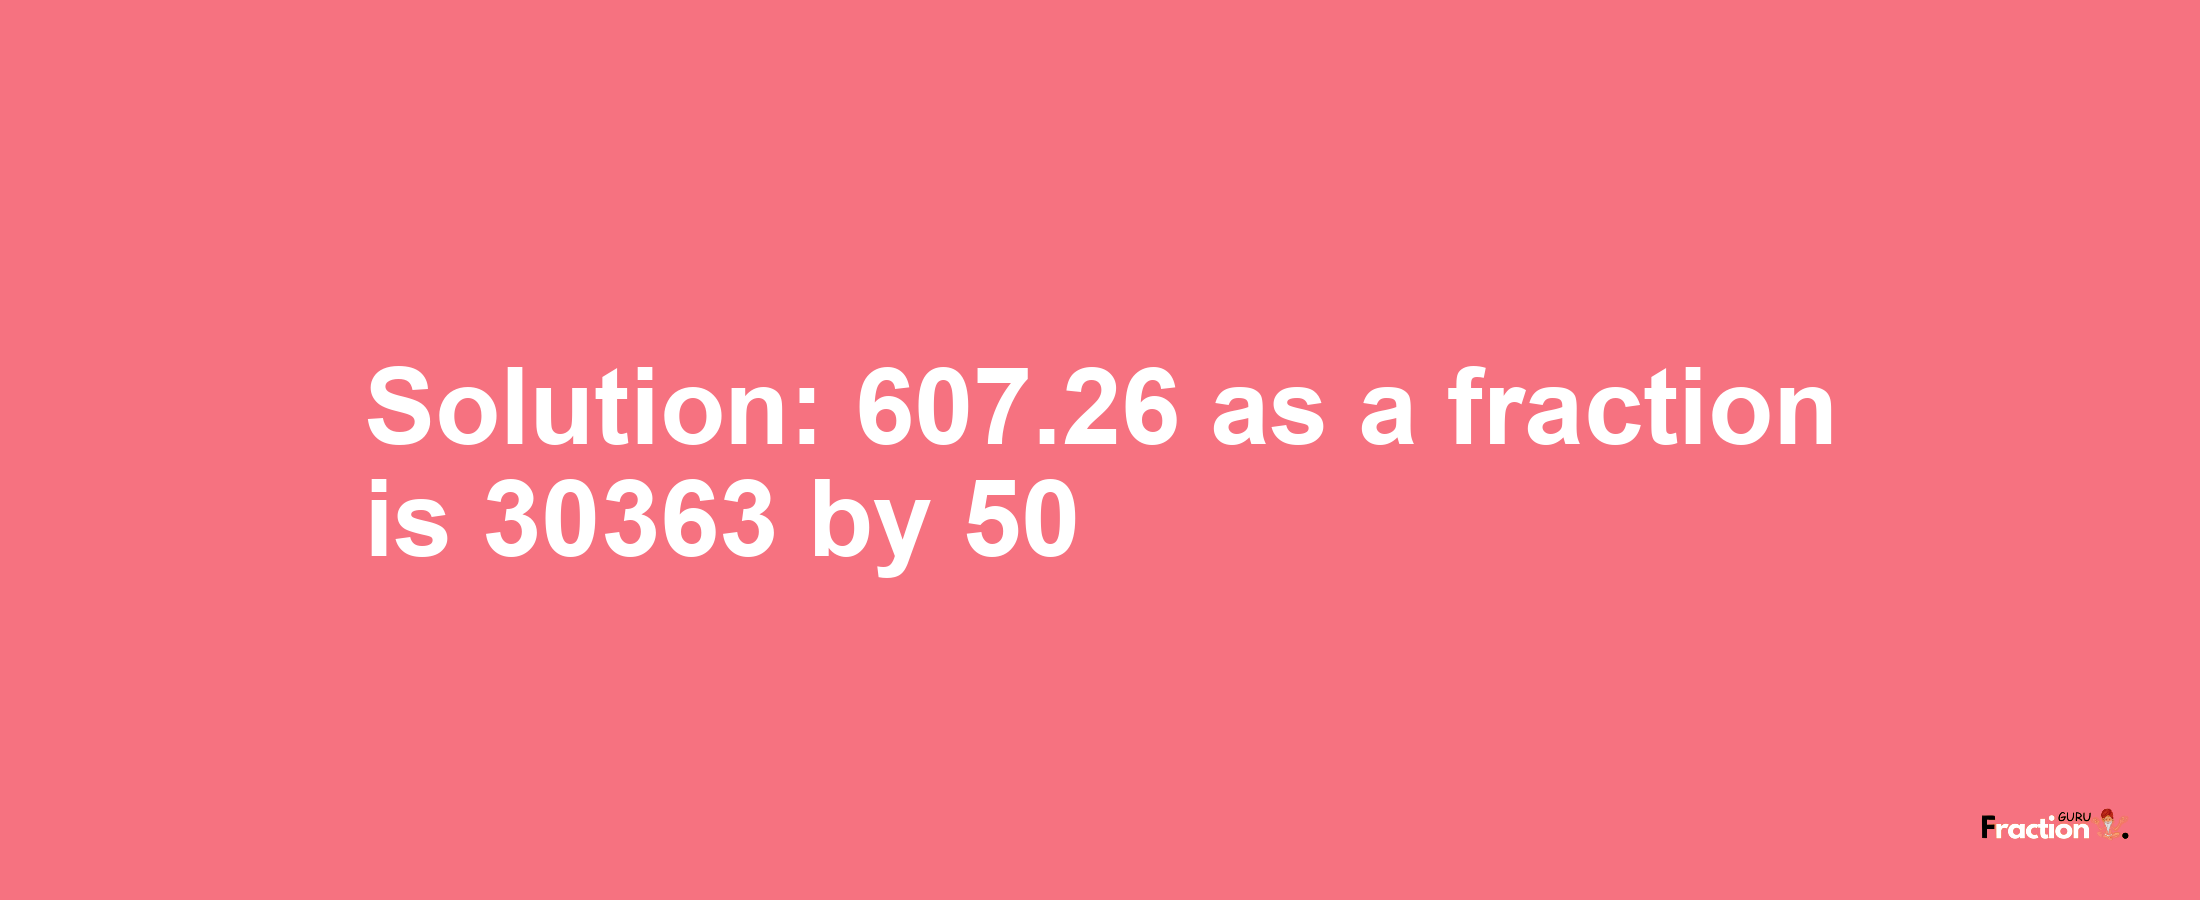 Solution:607.26 as a fraction is 30363/50